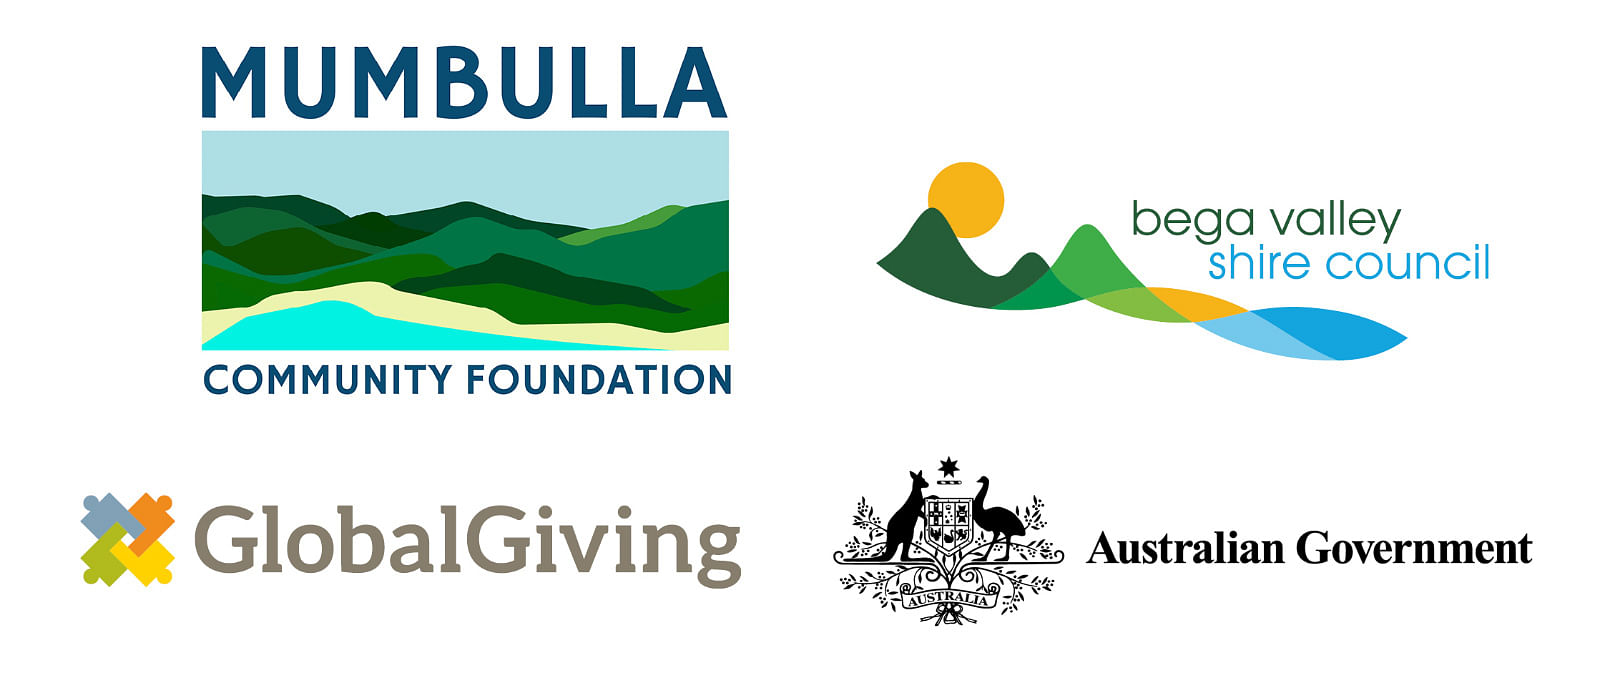 Mumbulla Foundation, Bega Valley Shire Council, Gloal Giving and Australian Government business logos.